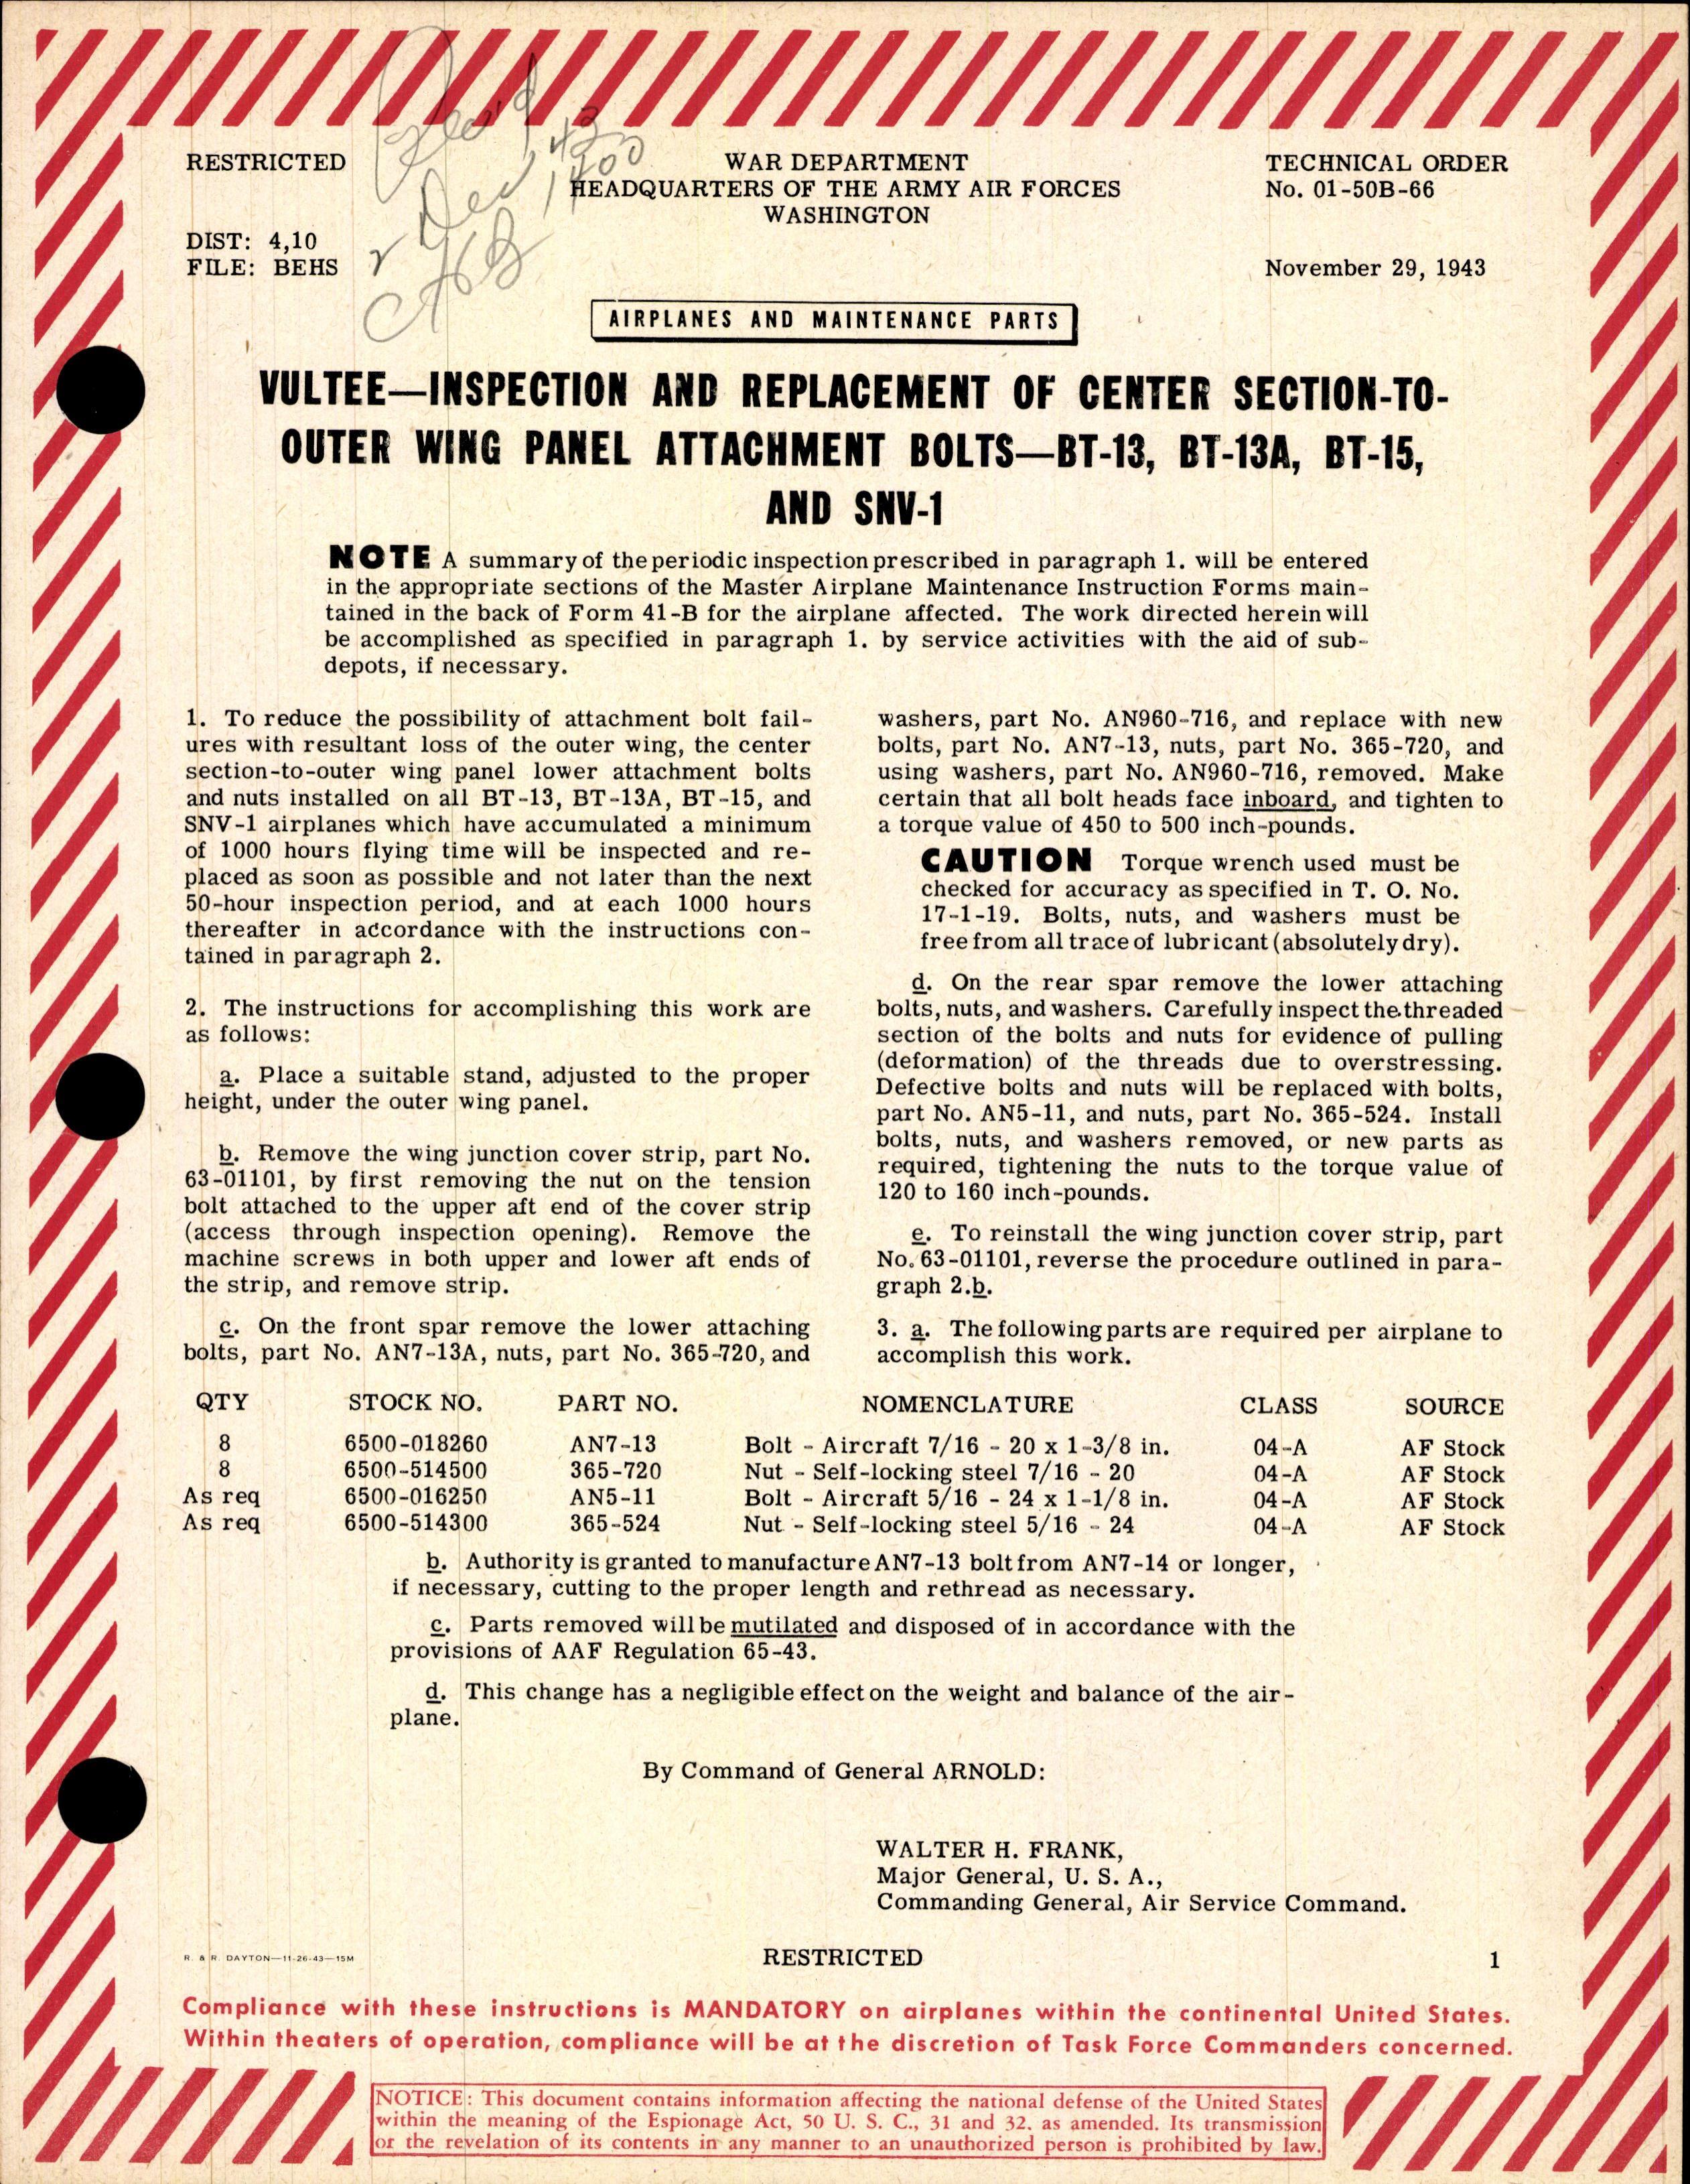 Sample page 1 from AirCorps Library document: Inspection and Replacement of Center Section-to-Outer WIng Panel Attachment Bolts - BT-13, BT-13A, BT-15, and SNV-1